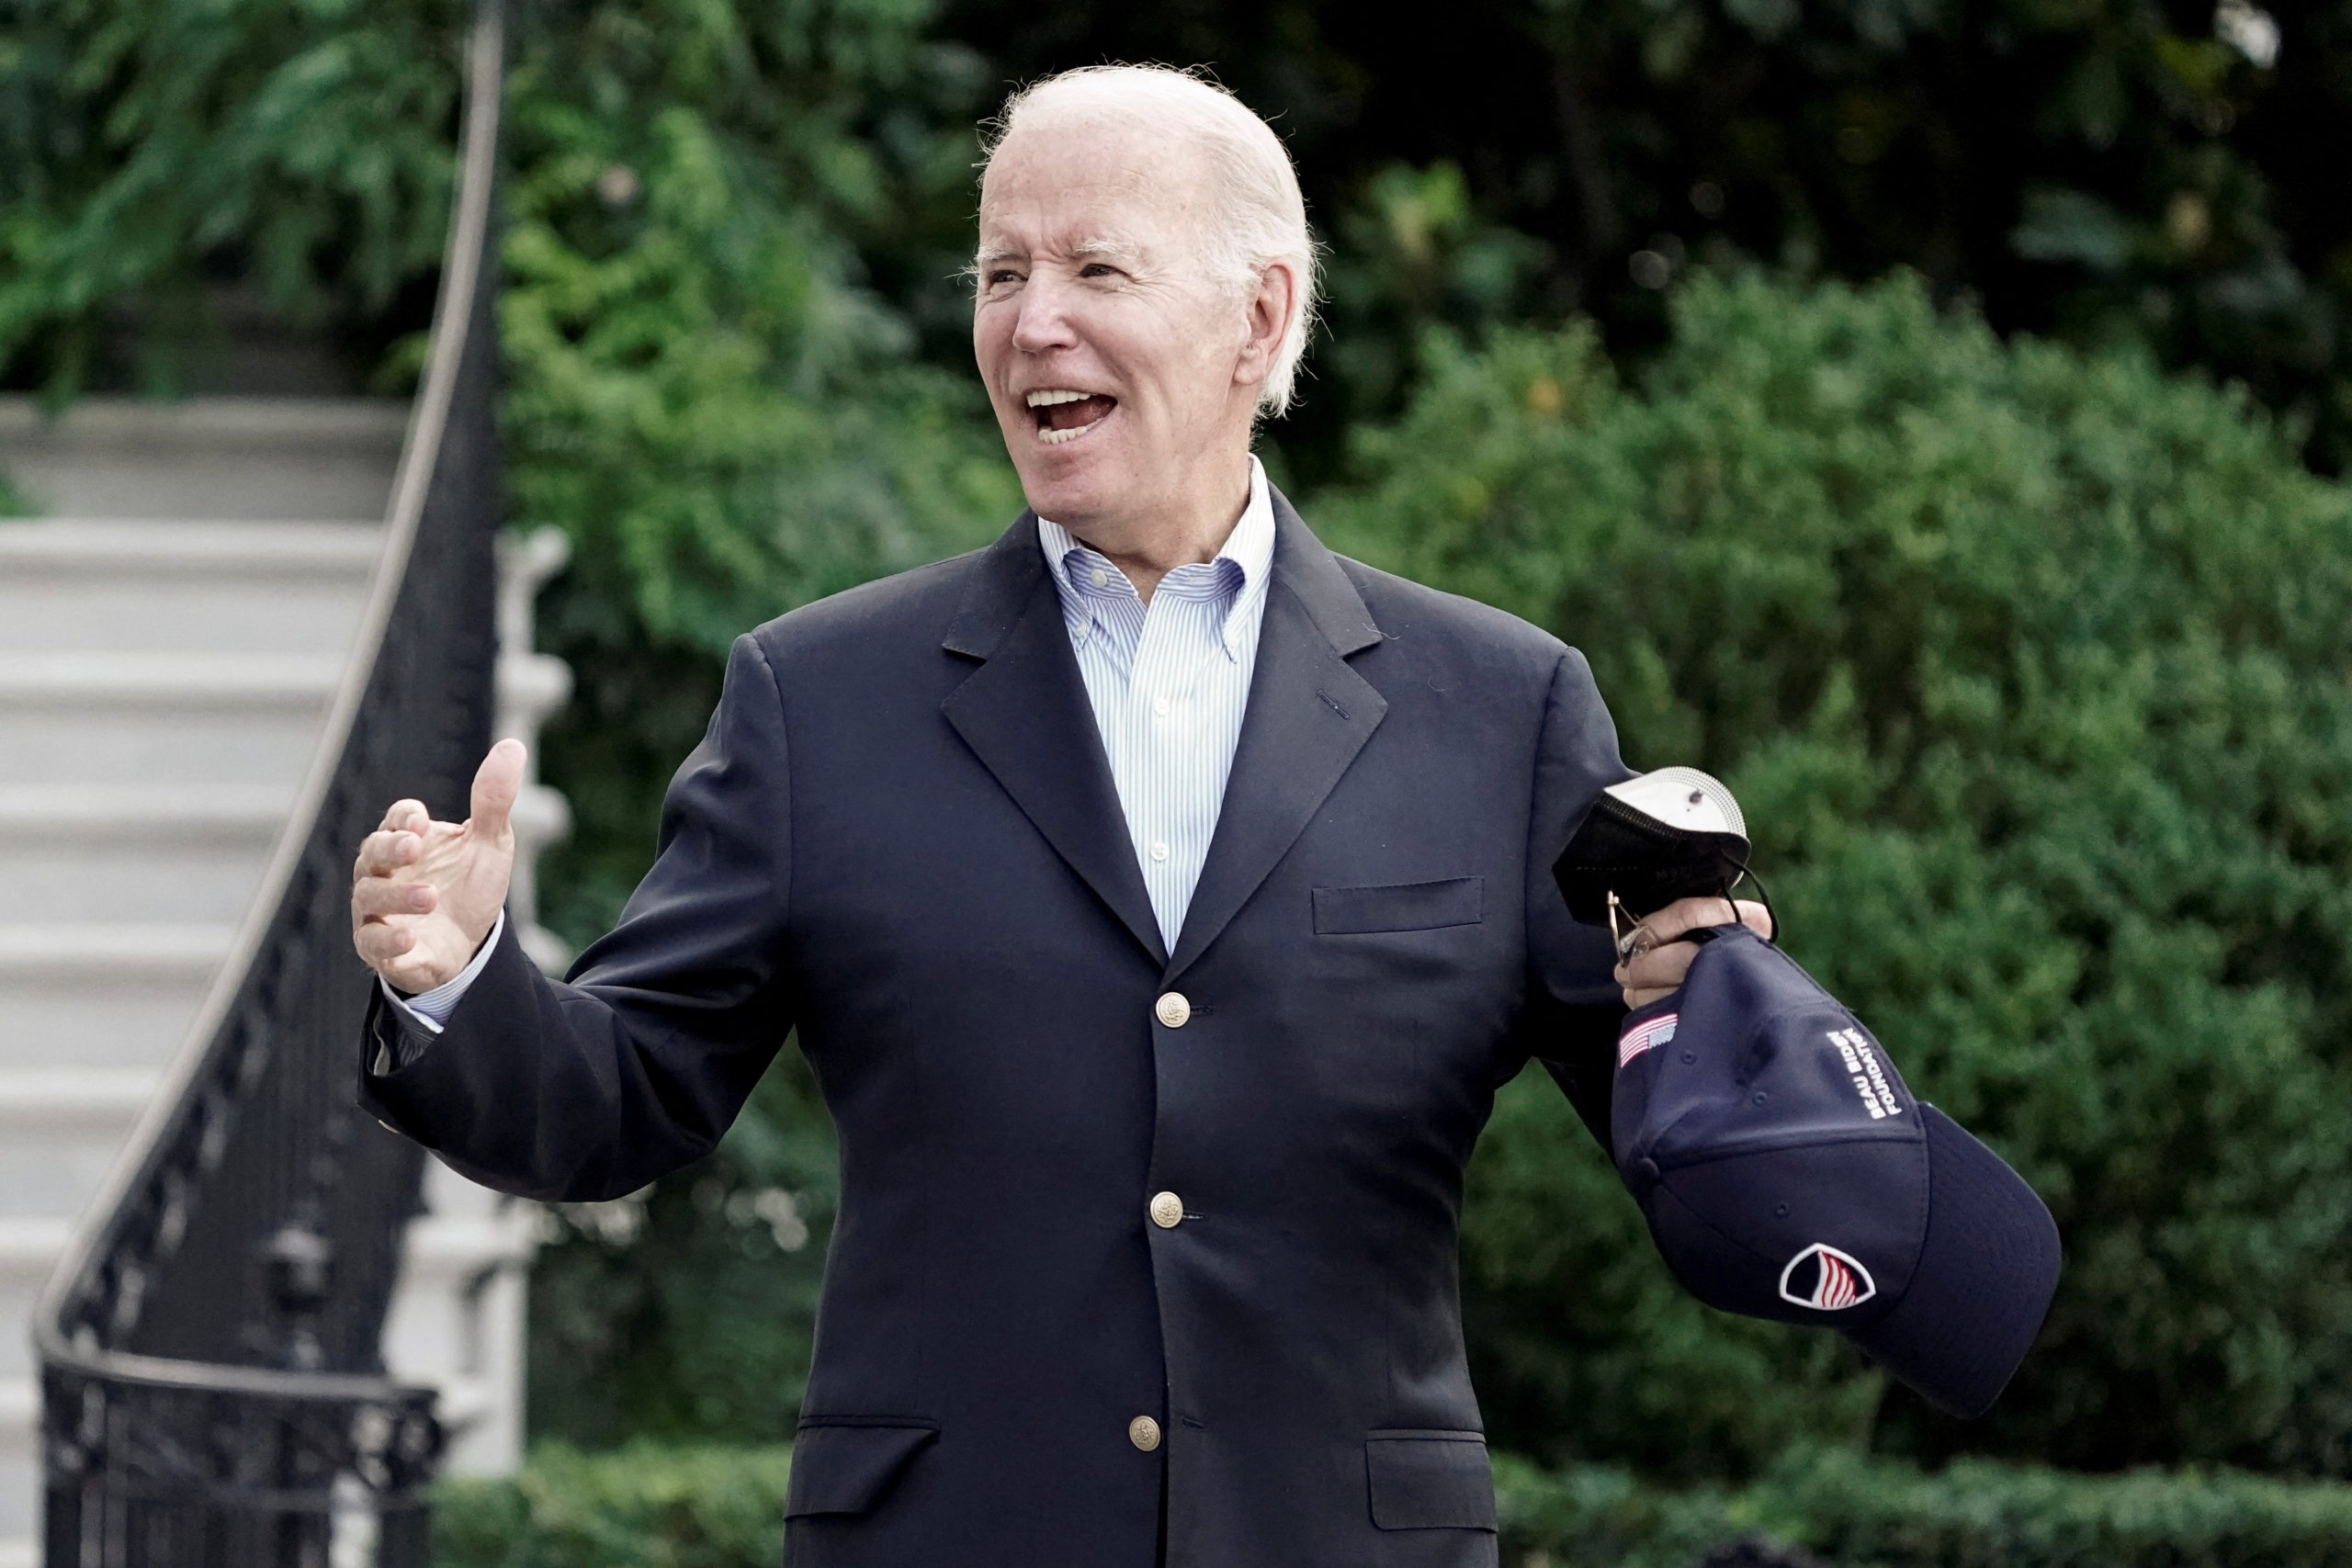 U.S. President Joe Biden gestures to the media as he walks towards Marine One for departure to Rehoboth Beach, Delaware from the South Lawn of the White House in Washington, D.C., U.S. August 7, 2022. REUTERS/Ken Cedeno